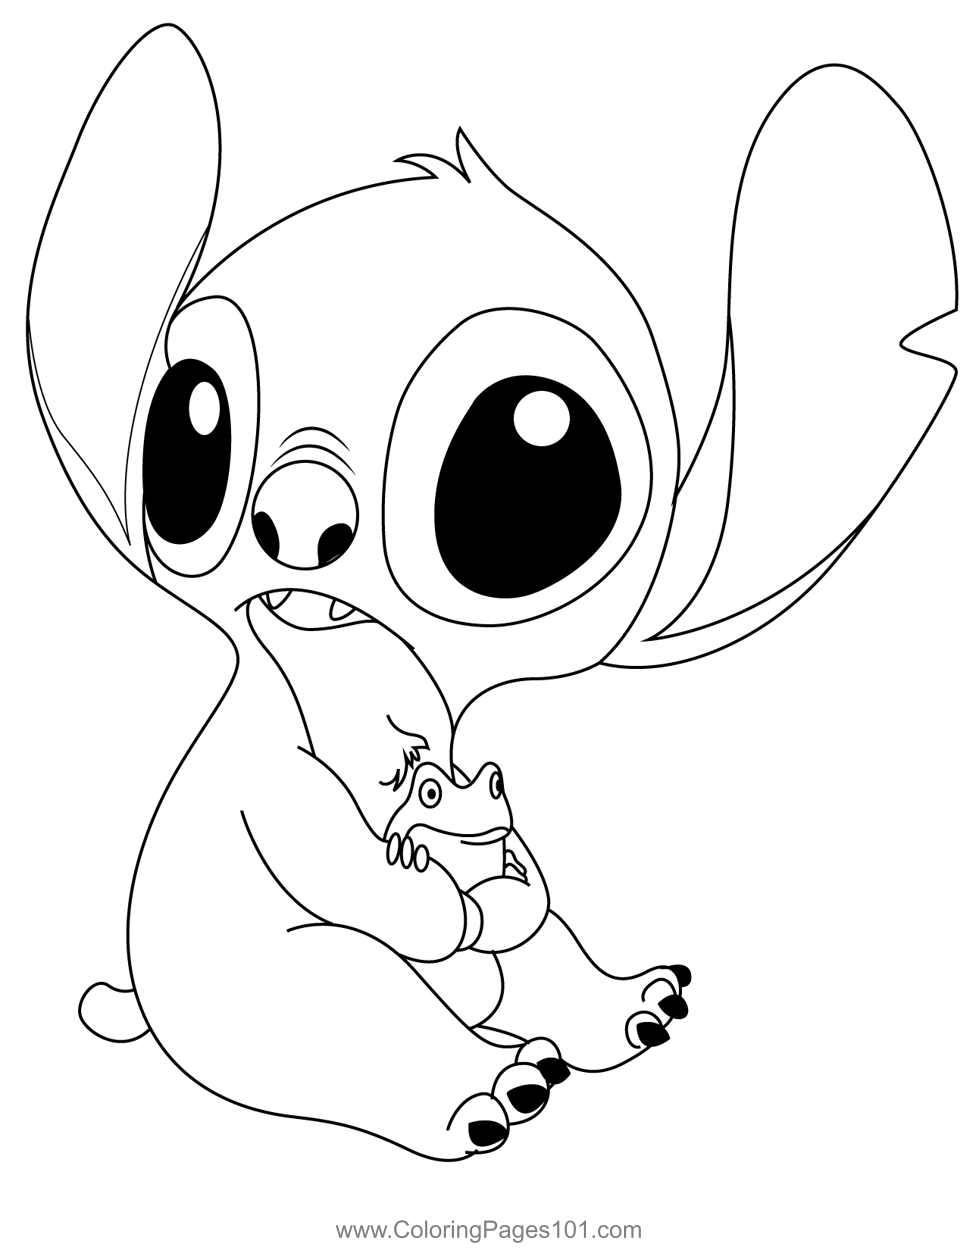 Stitch And Frog Coloring Page for Kids ...